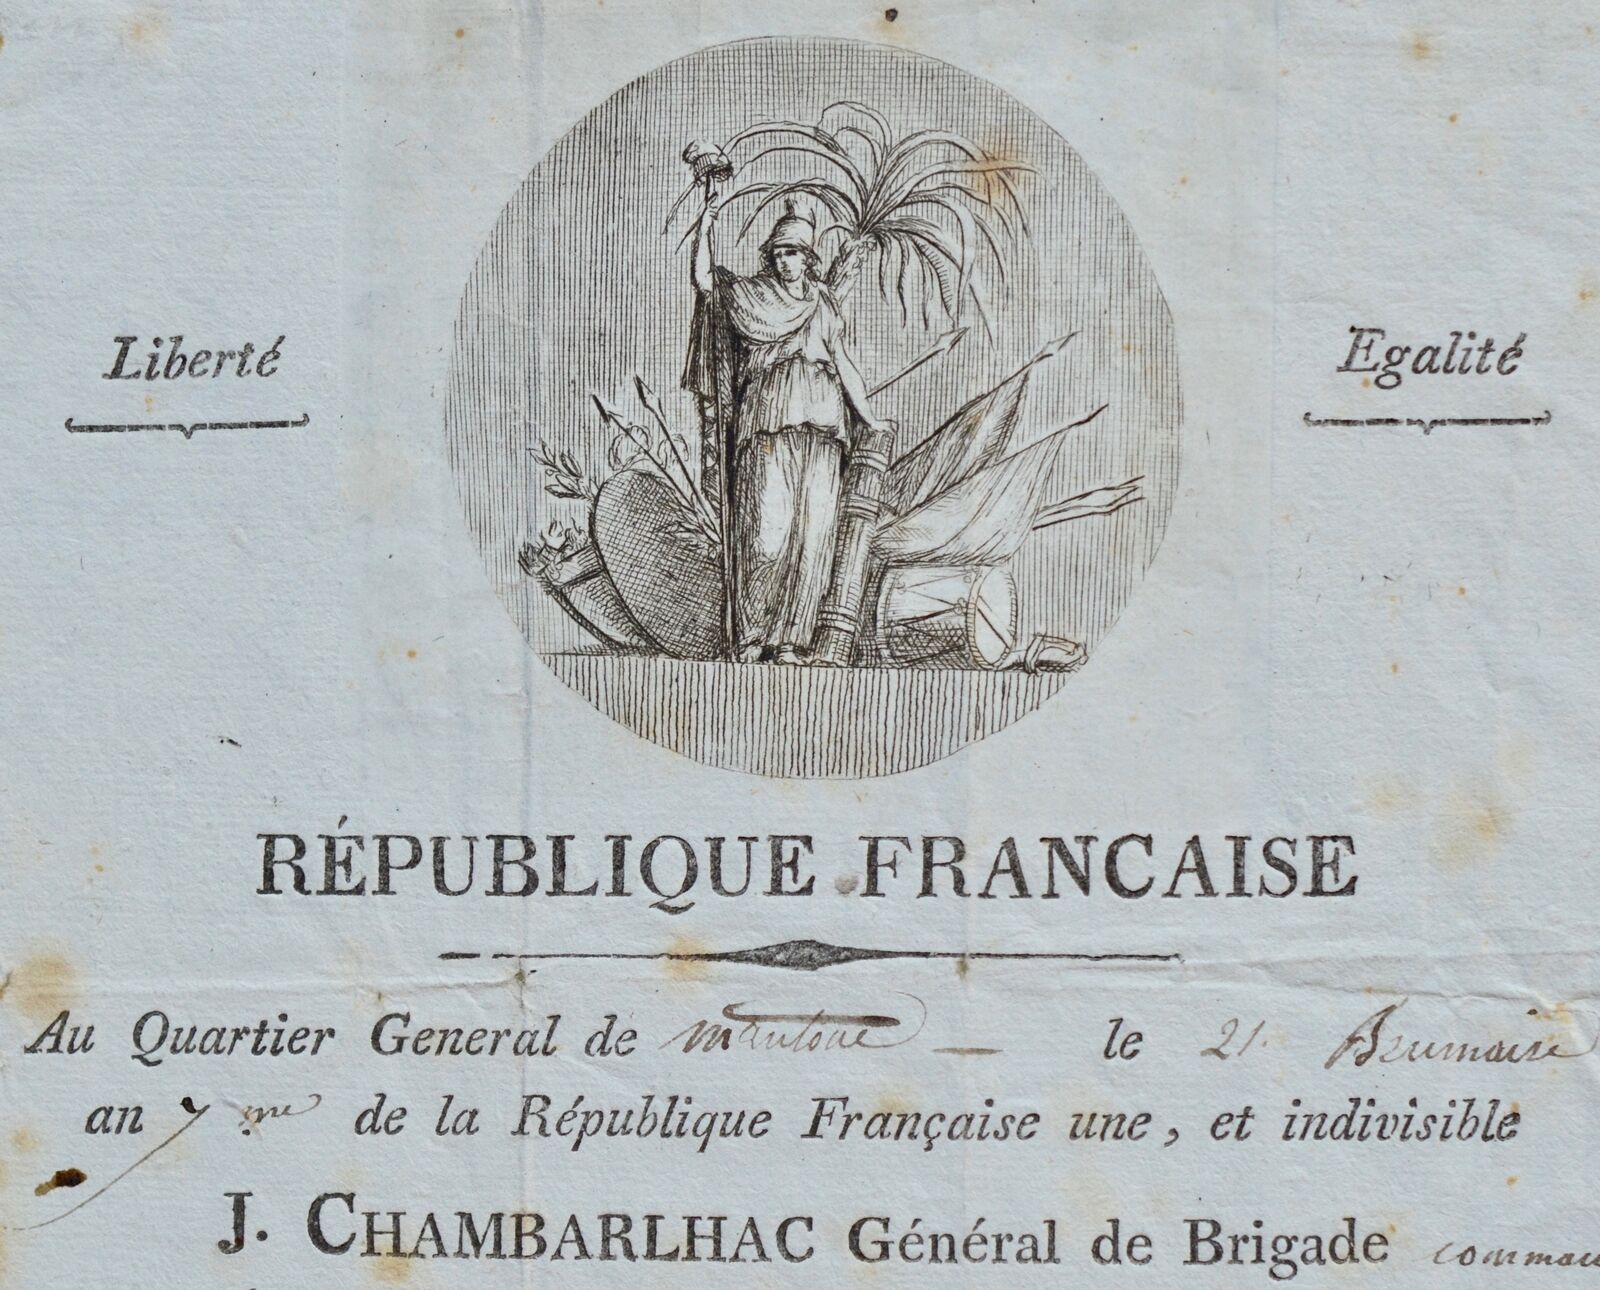 Letter from General Jacques-Antoine de Chambarlhac with beautiful vignette.